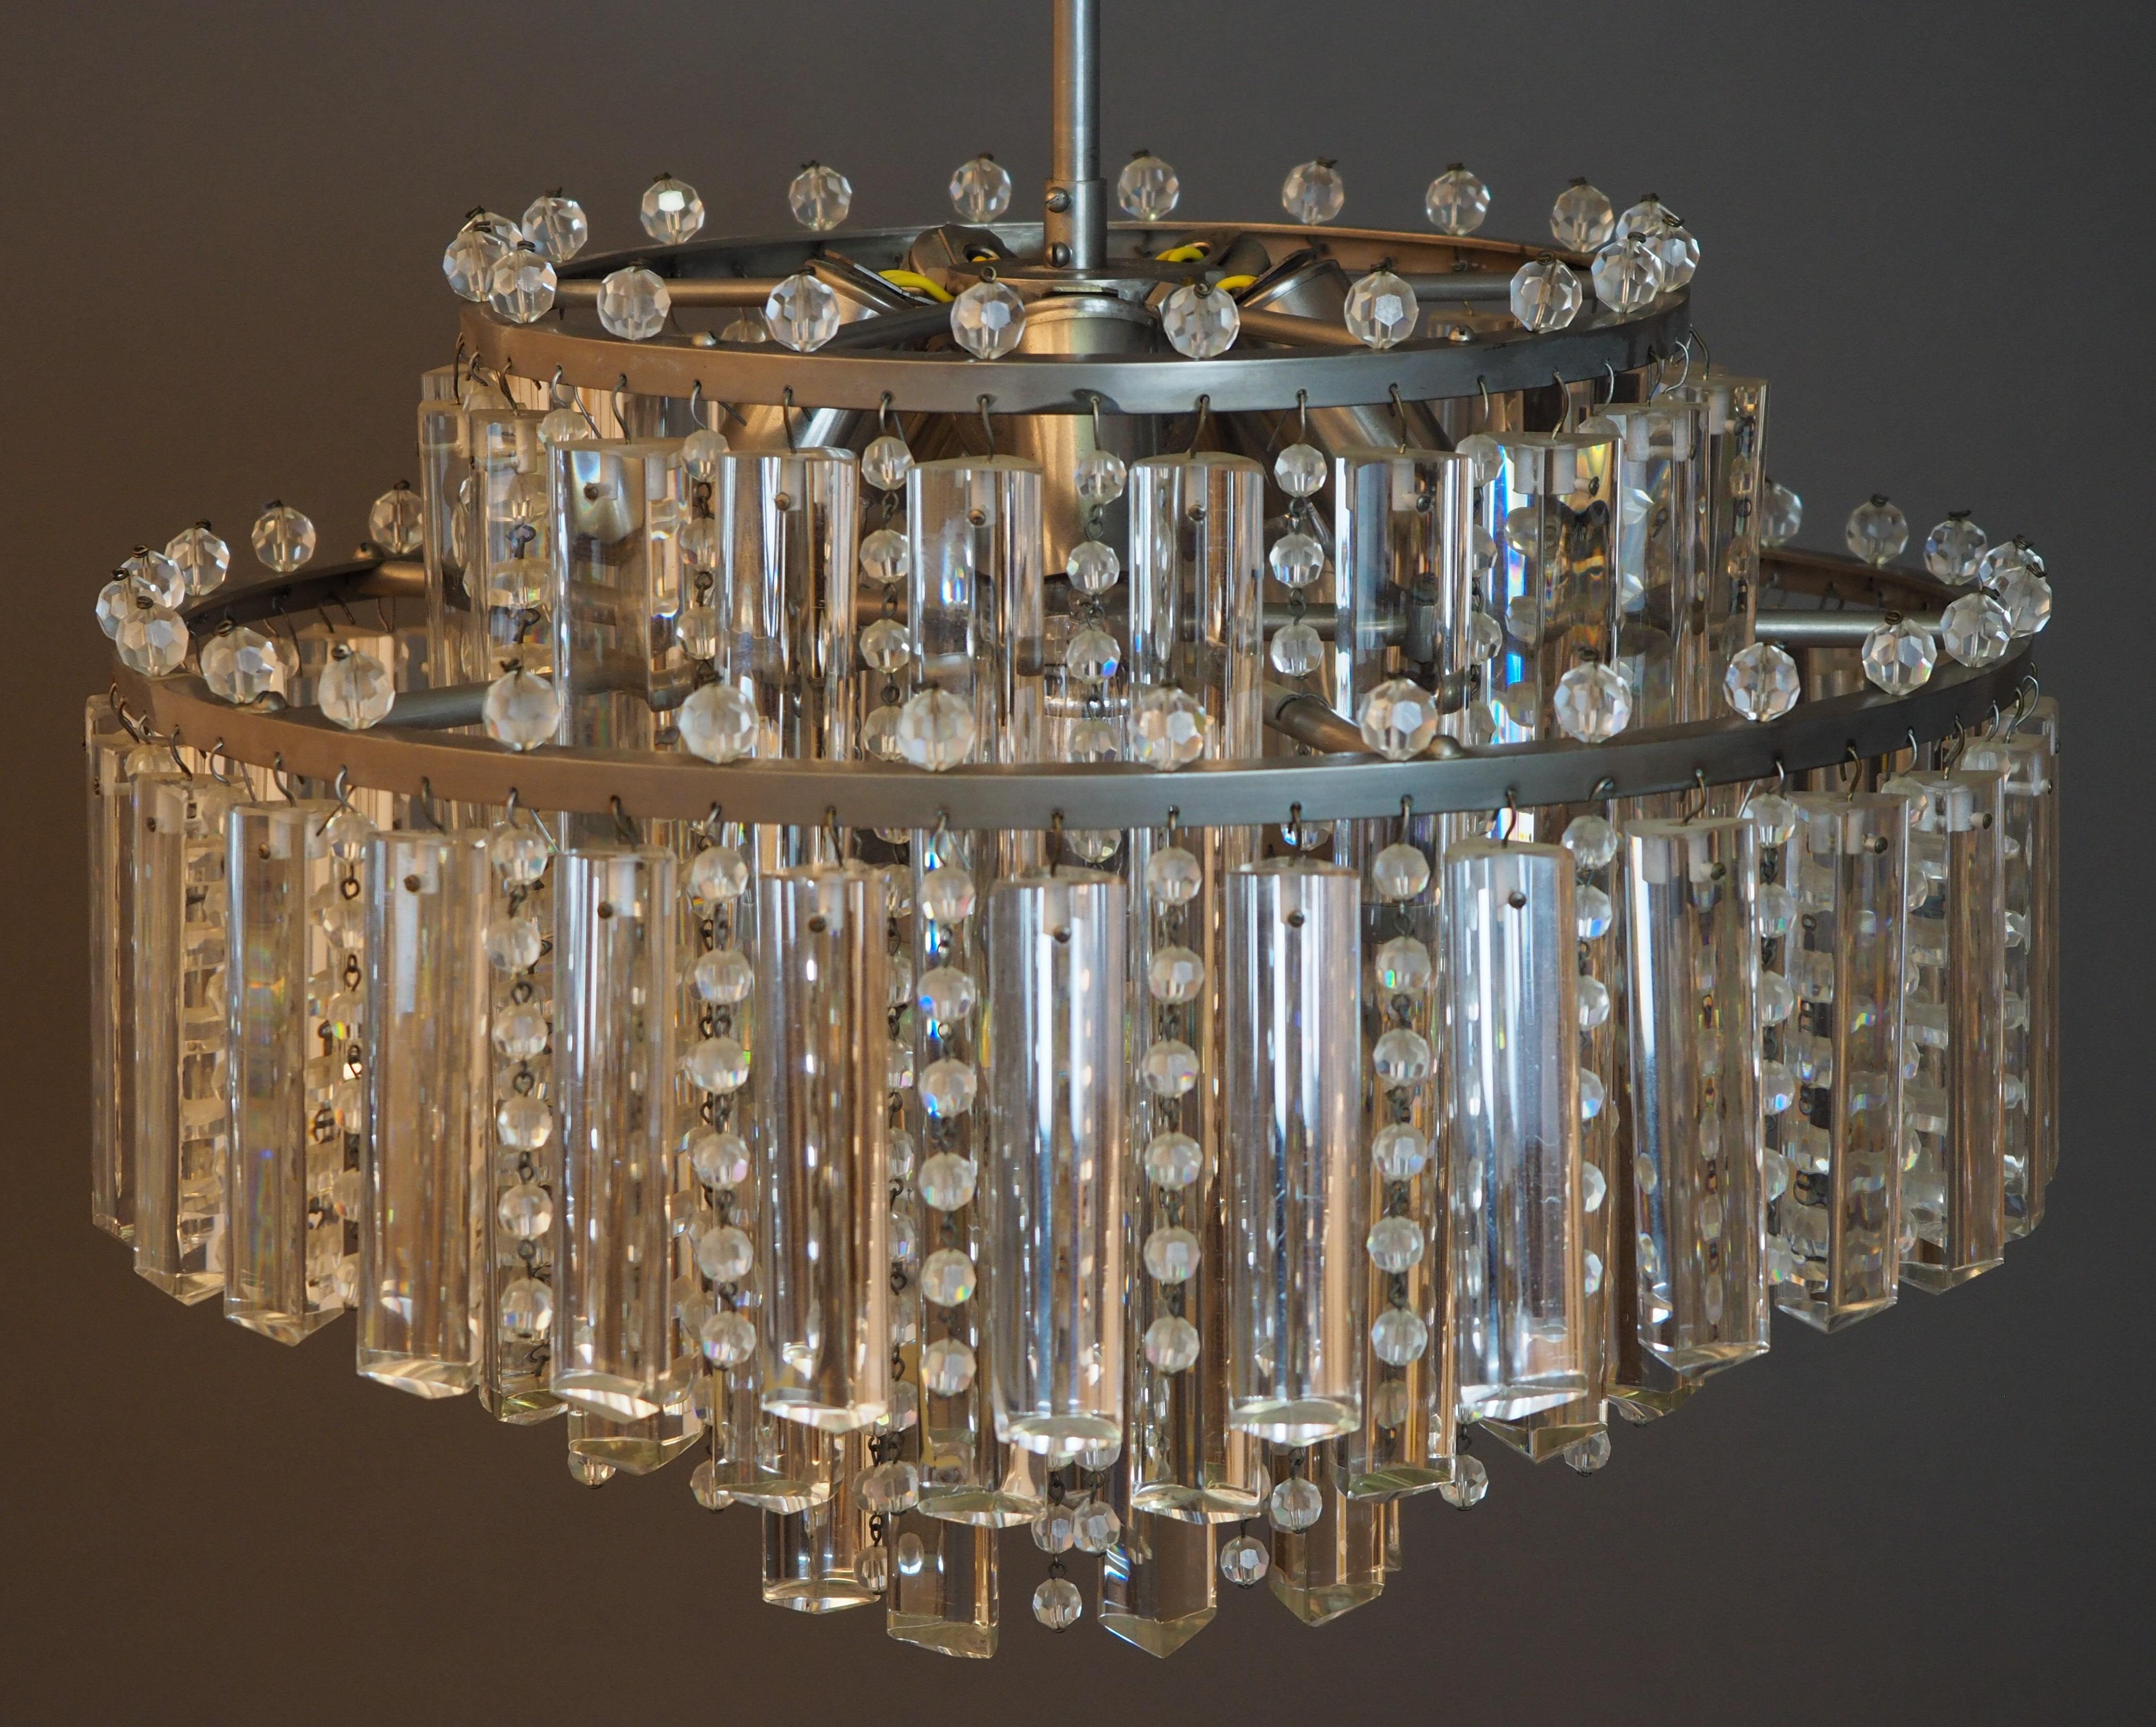 German Pair of Rare Heavy Cut Glass and Strass Chandeliers by Palwa, circa 1960s For Sale